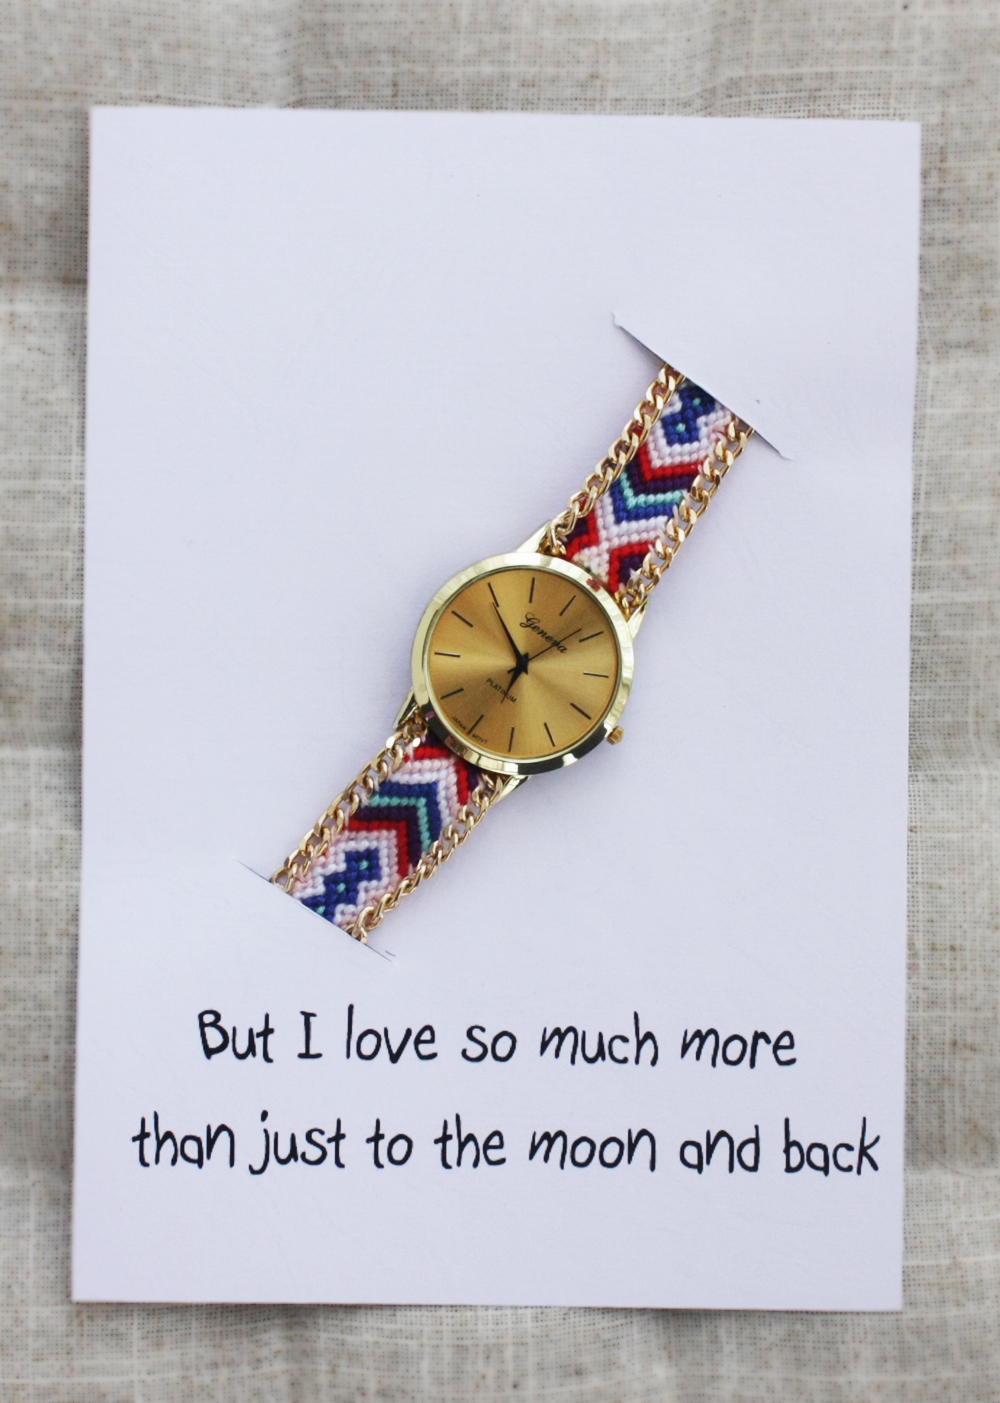 Colorful Band Friendship Wrist Gift But I Love You Much More Then Just To The Moon And Back Card Watch